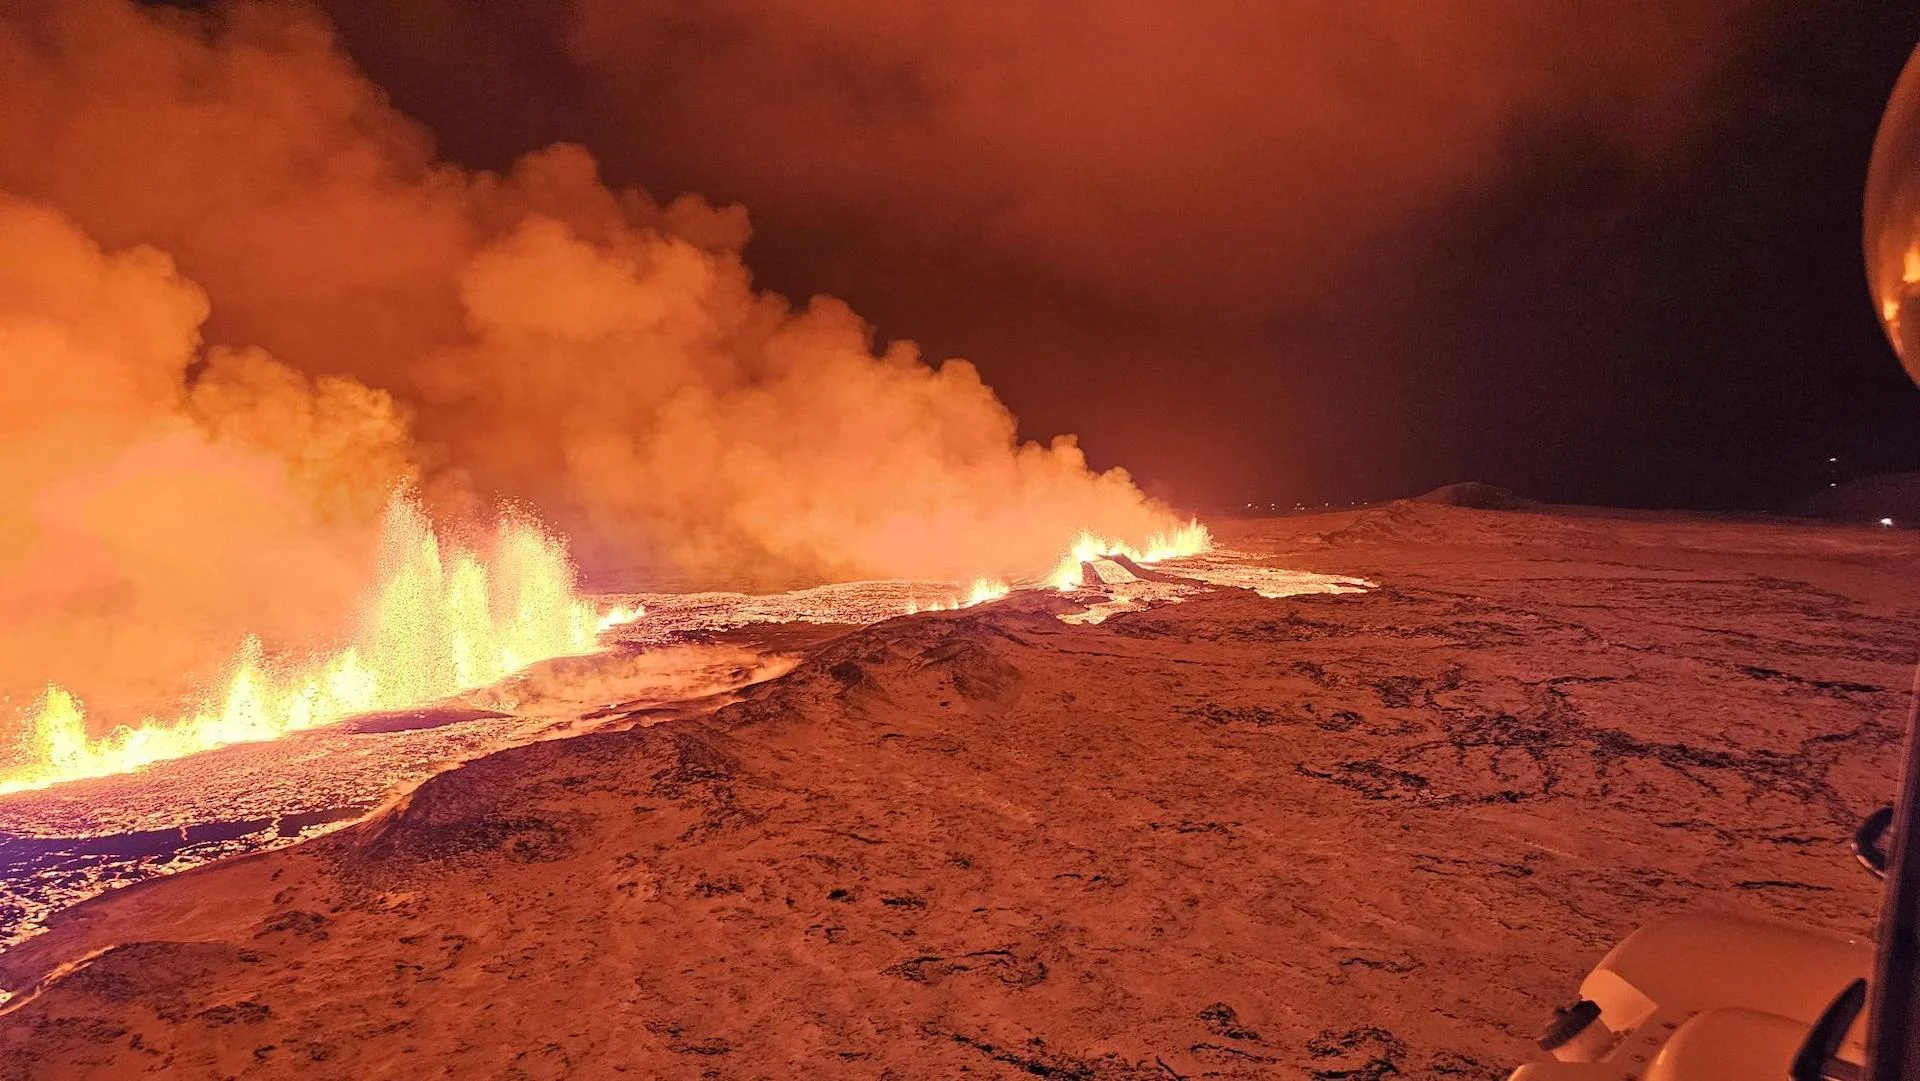 Iceland volcano erupts near town after weeks of quake activity